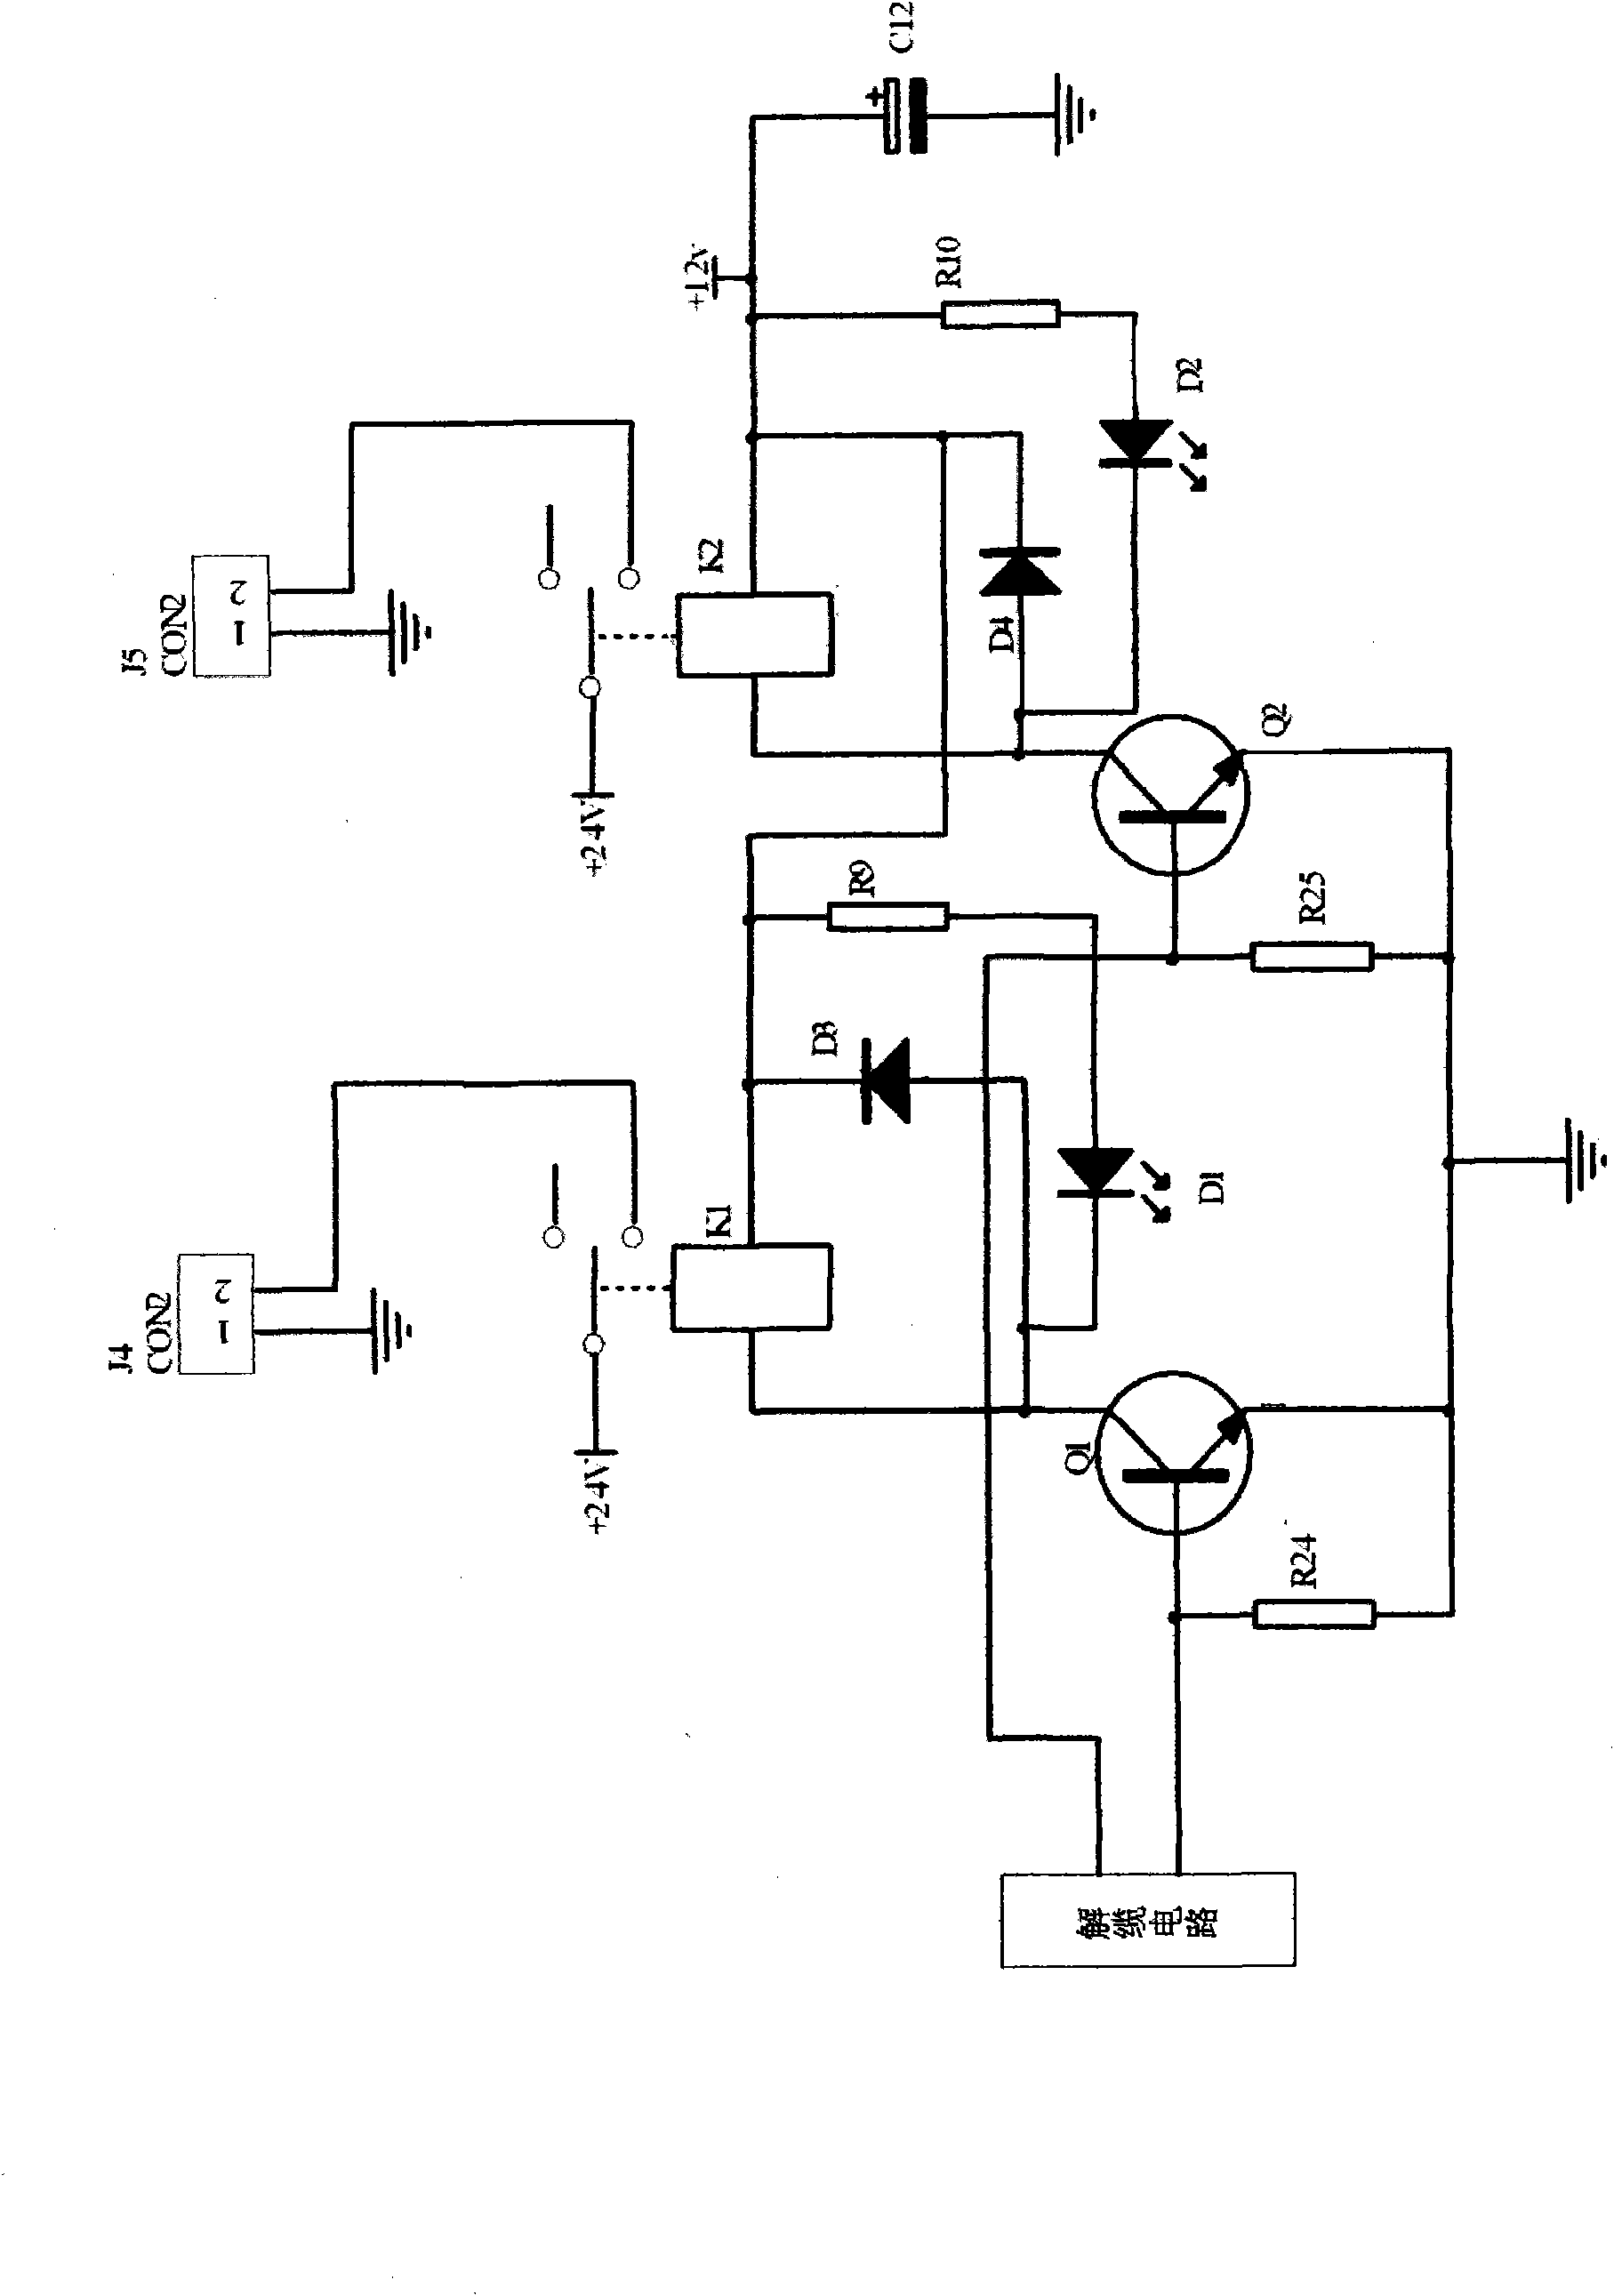 Yaw circuit system in wind power generating system